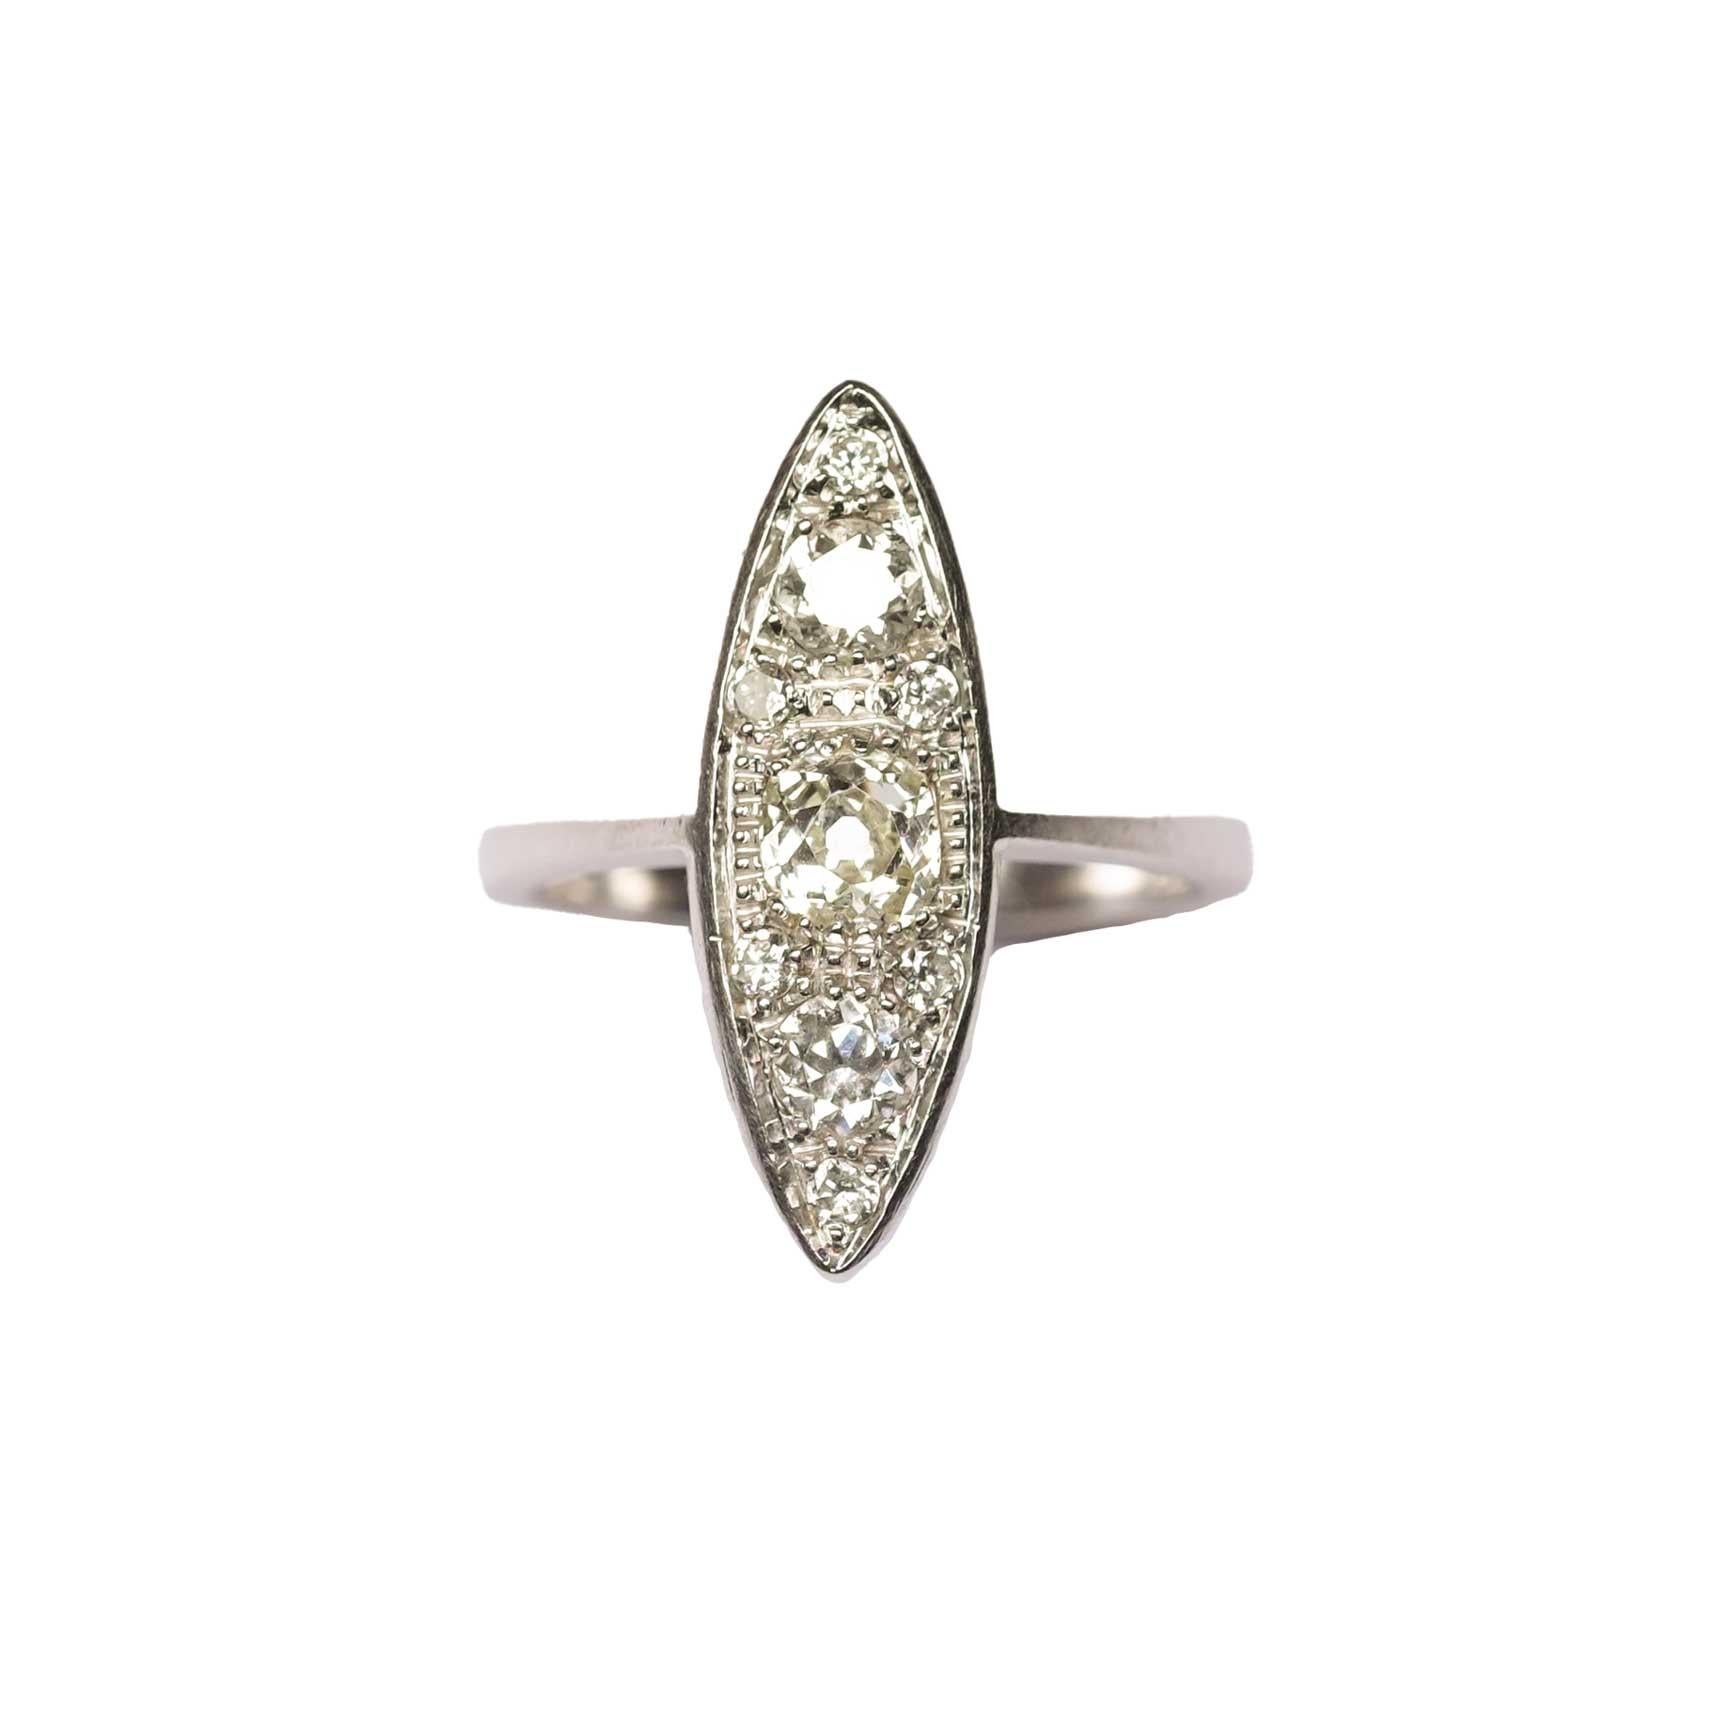 Vintage ring, made in Italy set in 18ct white gold with old cut diamonds for circa 0.75ct in total.
Central stone is a cushion cut diamond of circa 0.30ct, with a slight yellow tinge, with no visible inclusions to the eye.

Highlights
- Vintage Made